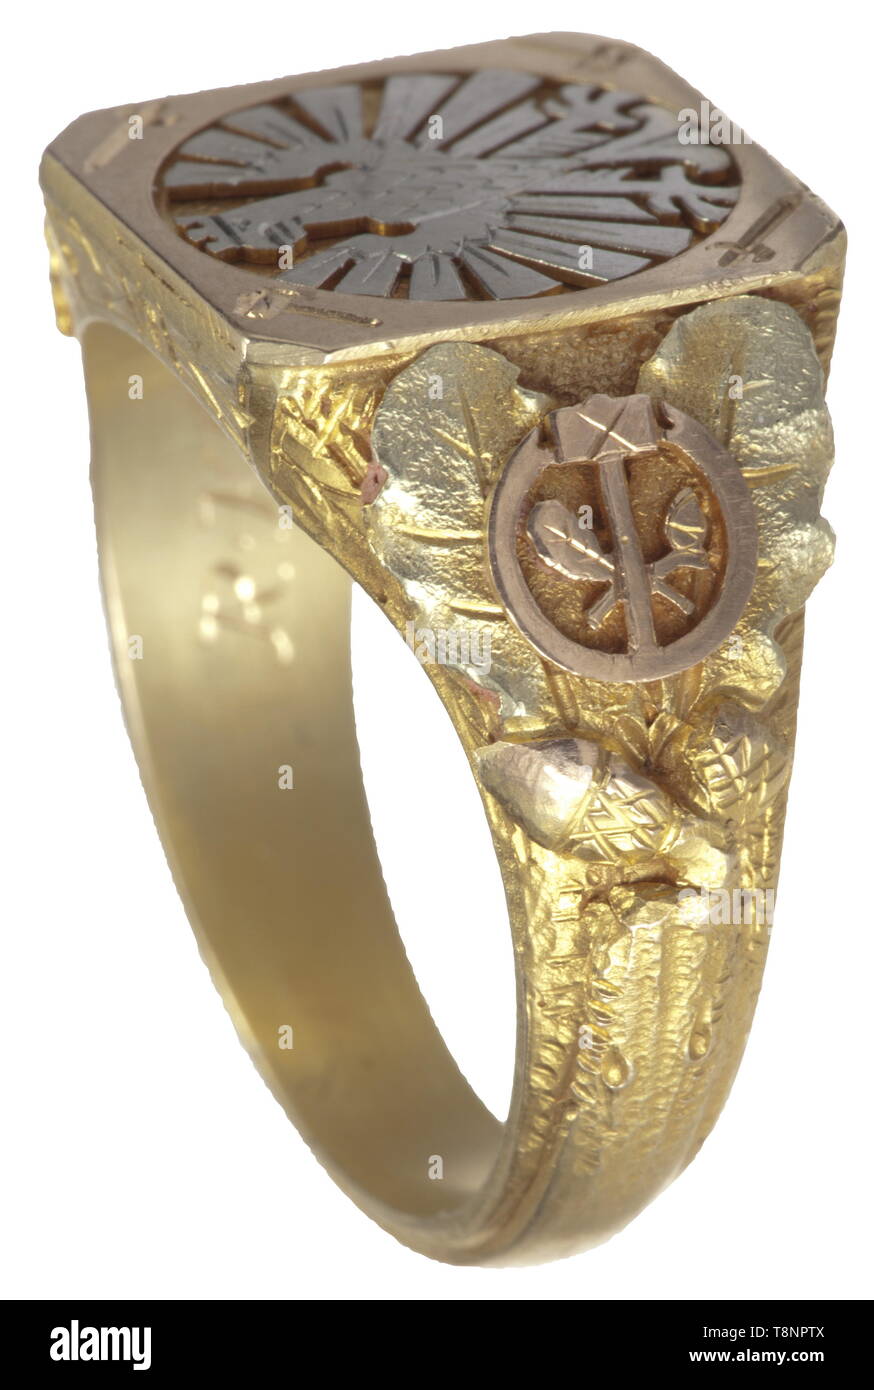 An honour ring of the 'City of German Crafts', Frankfurt on the Main Elaborate jeweller's work in various gold tones, the quadrangular plate on the obverse inlaid with a Frankurt eagle in white gold and alternately sword and hammer at the corners, the sides with separately applied golden oak leaves and acorns (some removed due to usage) and the emblems of the DAF and the Crafts Association, respectively, in red gold. The inner surface is engraved with 'Ehrengabe der Stadt des Deutschen Handwerks' and 'R.H.T. 1936' with fineness punch '585' and master's mark 'JF' for Frankfu, Editorial-Use-Only Stock Photo